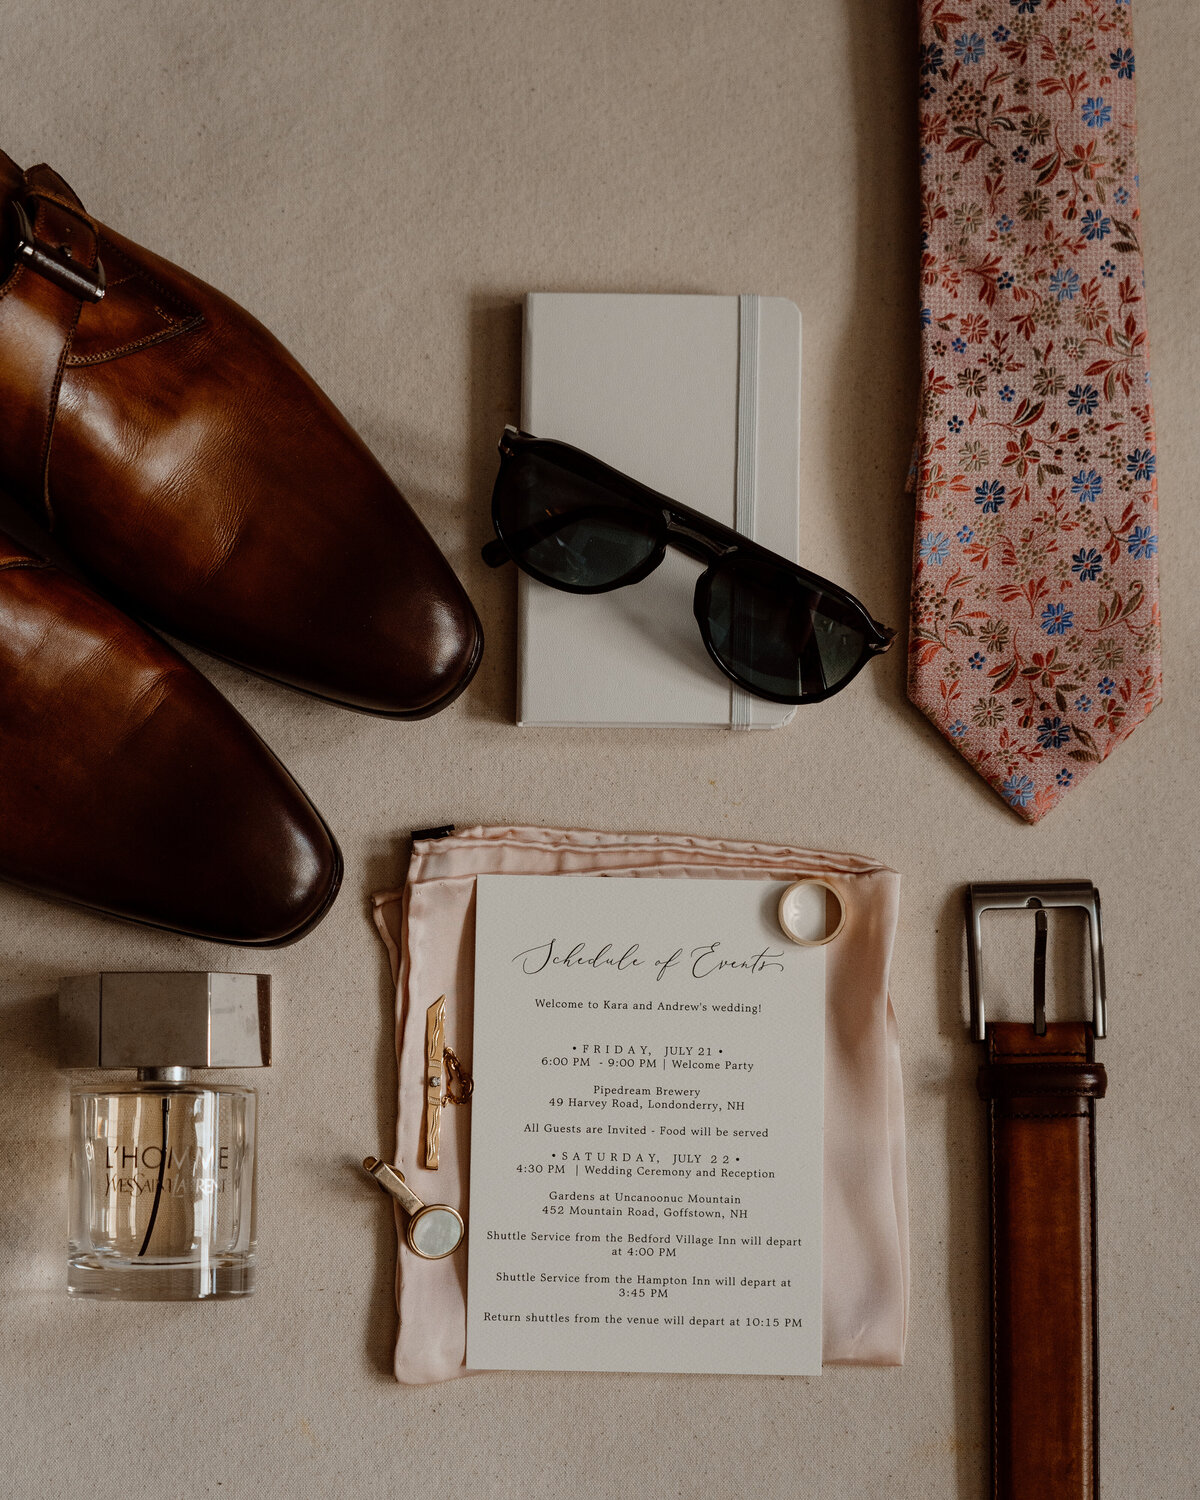 Flat lay of groom's wedding day essentials including brown leather shoes, floral tie, sunglasses, cologne, belt, schedule of events, and accessories